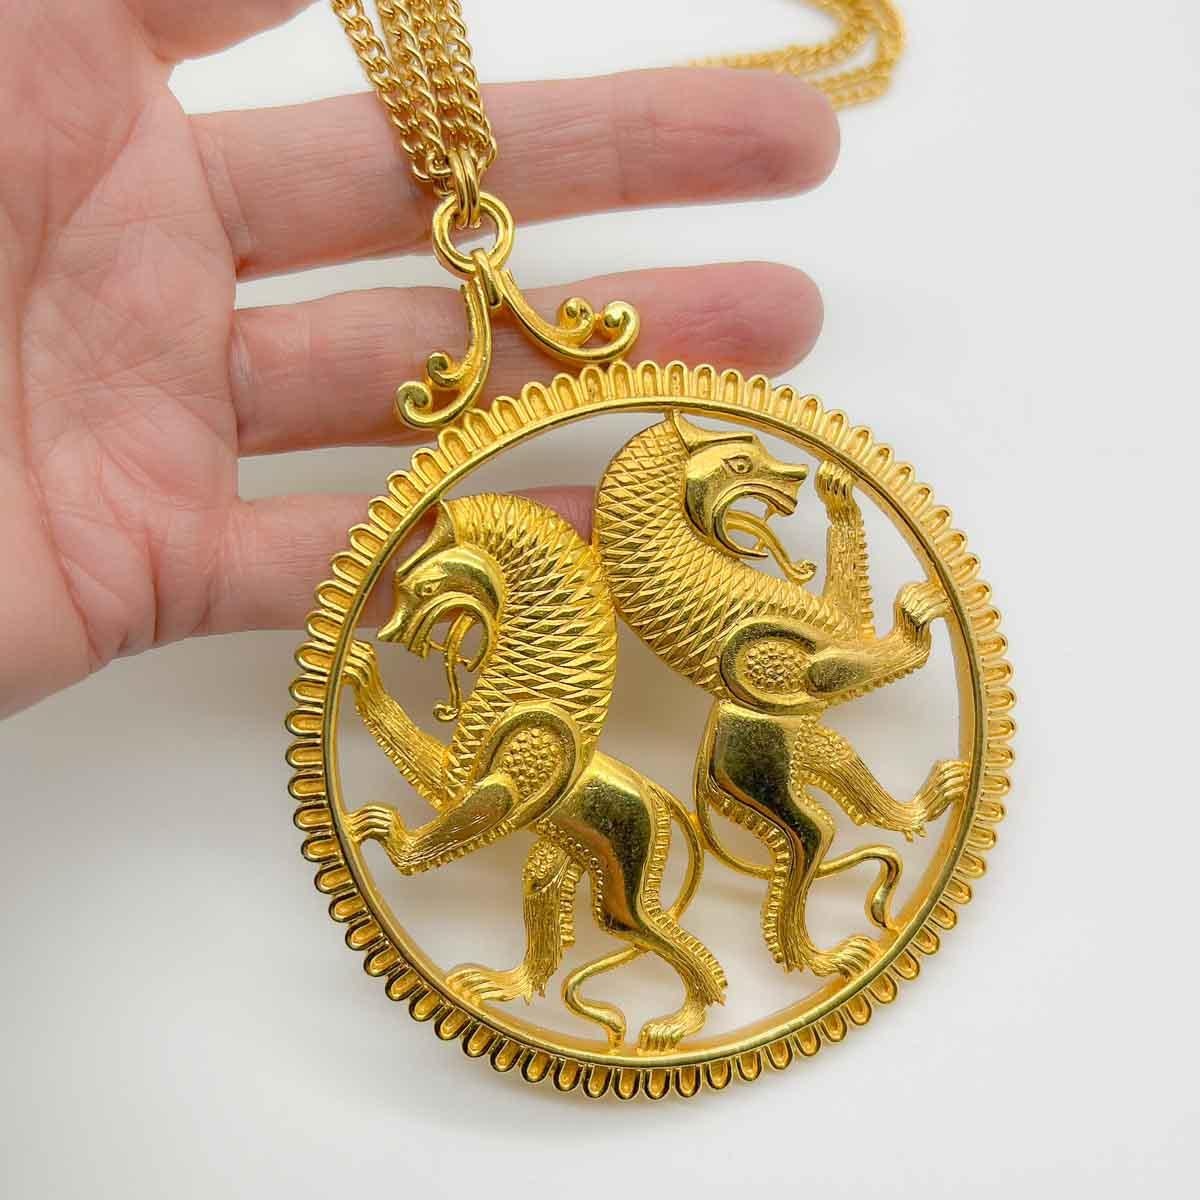 A gigantic, wonderfully lustrous heraldic style Vintage Rampant Lions Medallion Necklace. Denoting courage and strength this is the ultimate medallion and style statement.
An unsigned beauty. A rare treasure. Just because a jewel doesn’t carry a